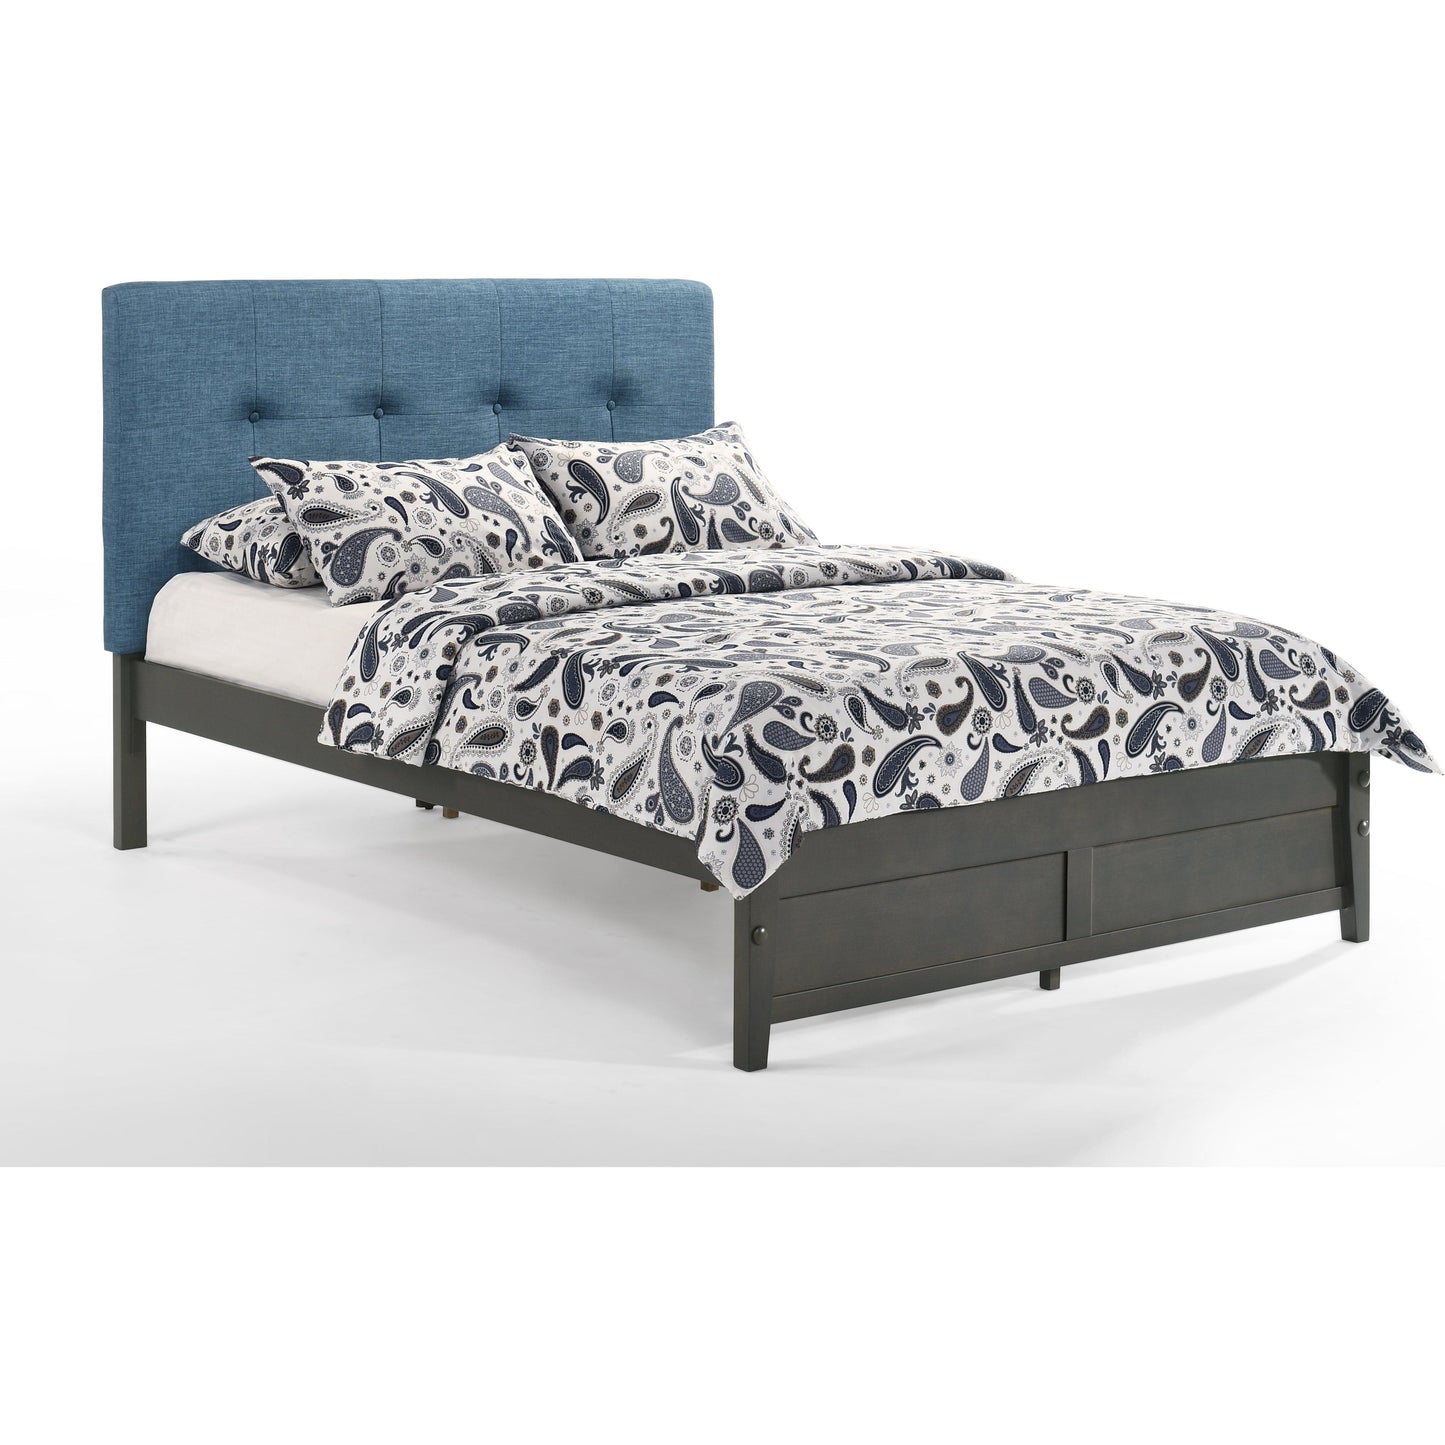 Night and Day Paprika Queen Bed in Red with Stonewash Finish Frame (K Series) Teal PAP-KH-QEN-TL-STW-COM